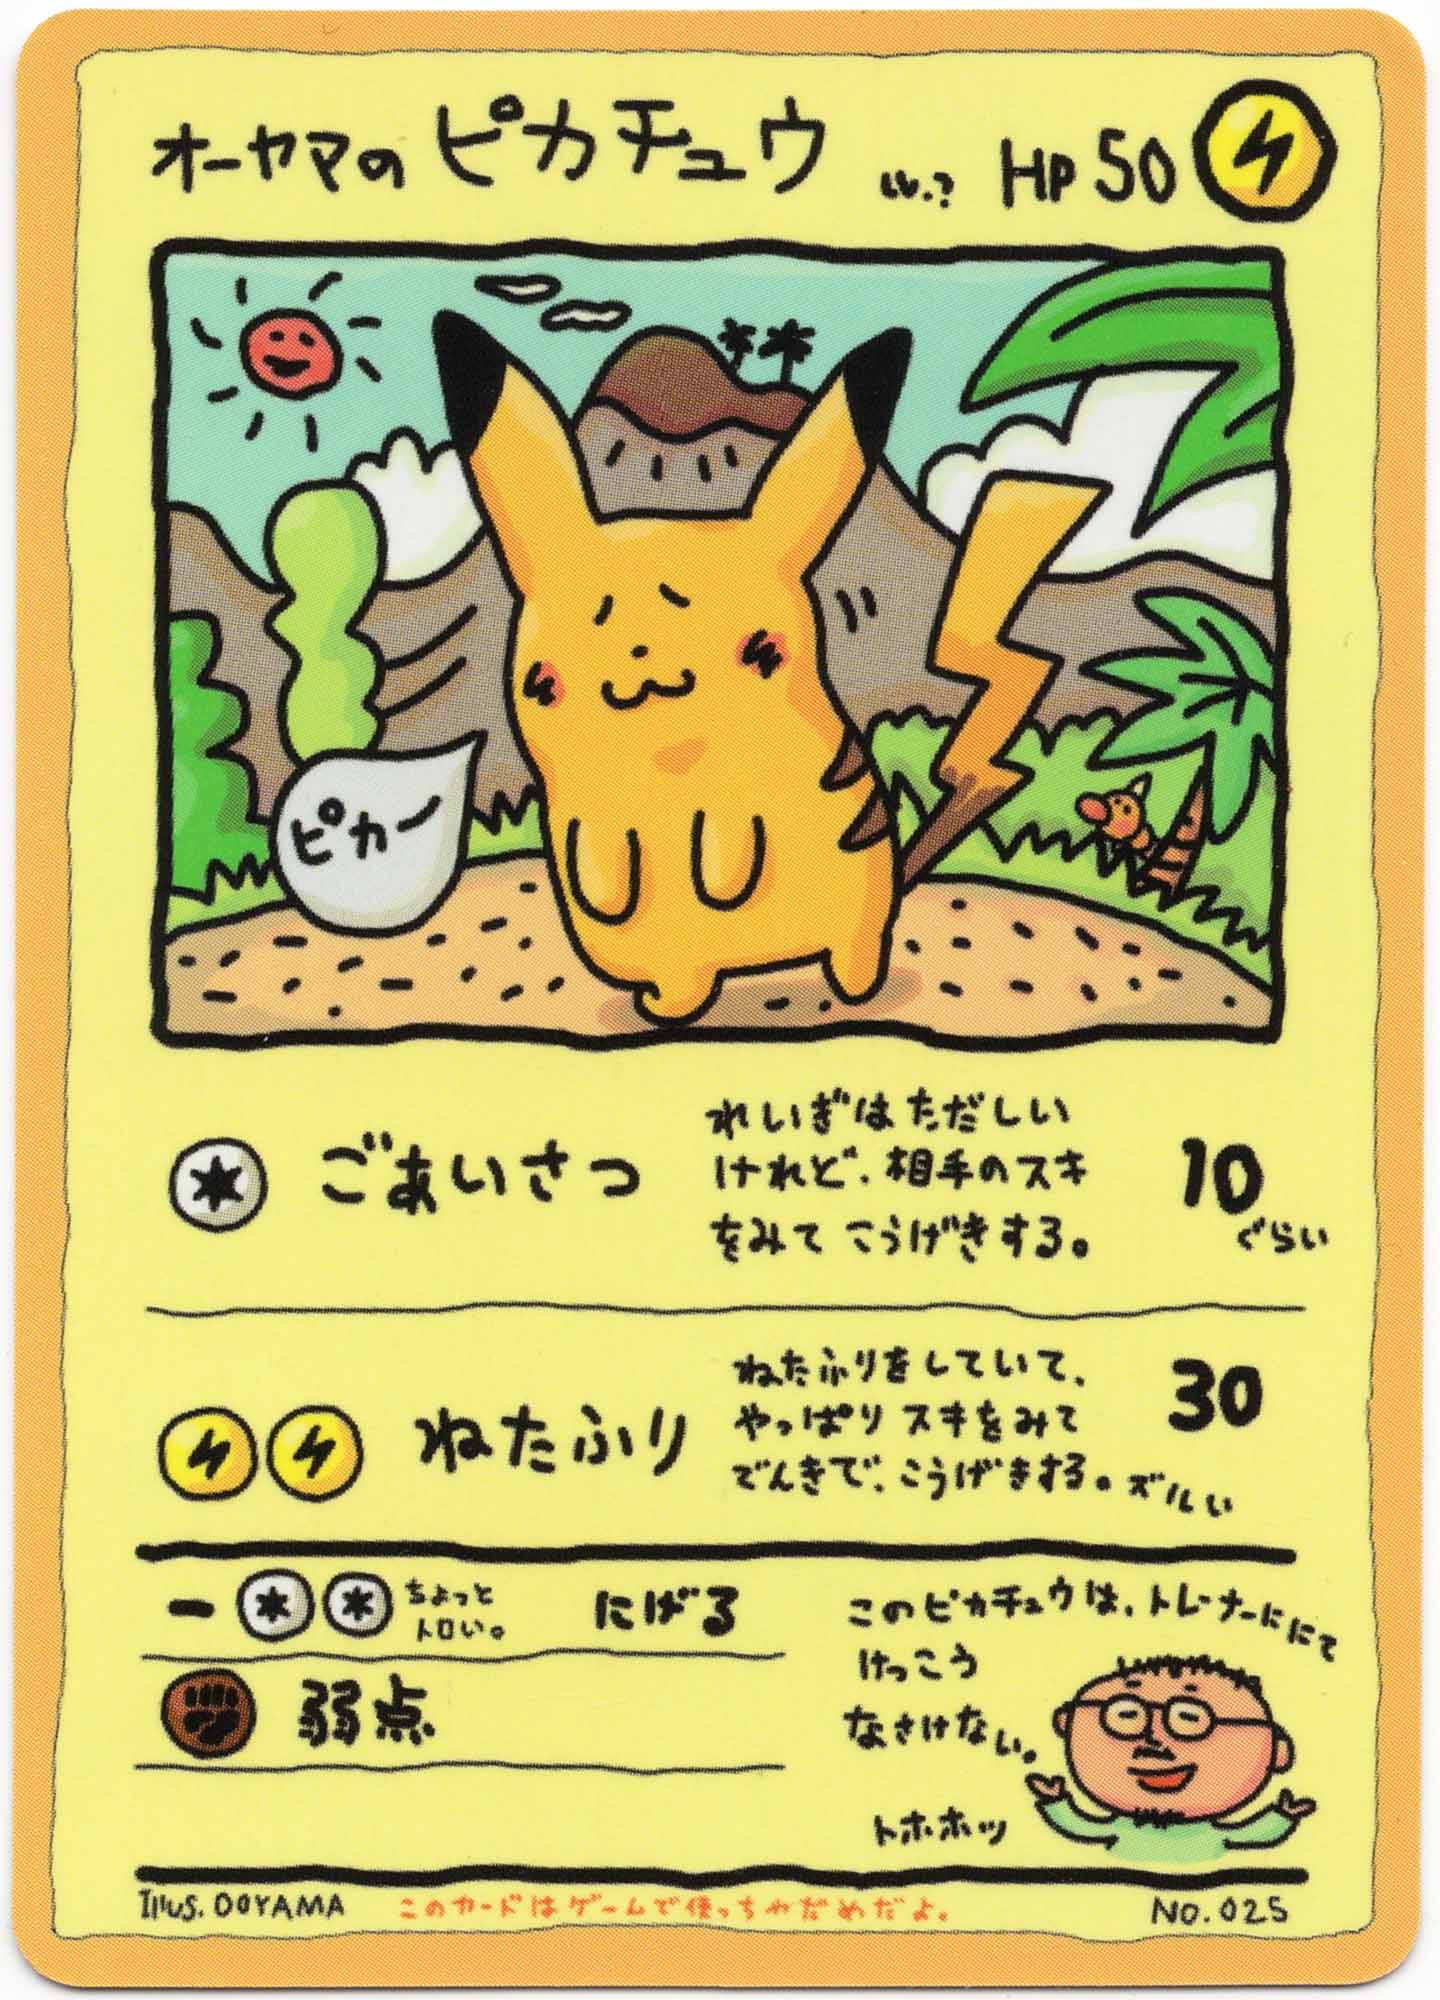 Ooyama's Pikachu - No. 025 - Non-Holo - Expansion Sheet 3 - (Moderately Played)